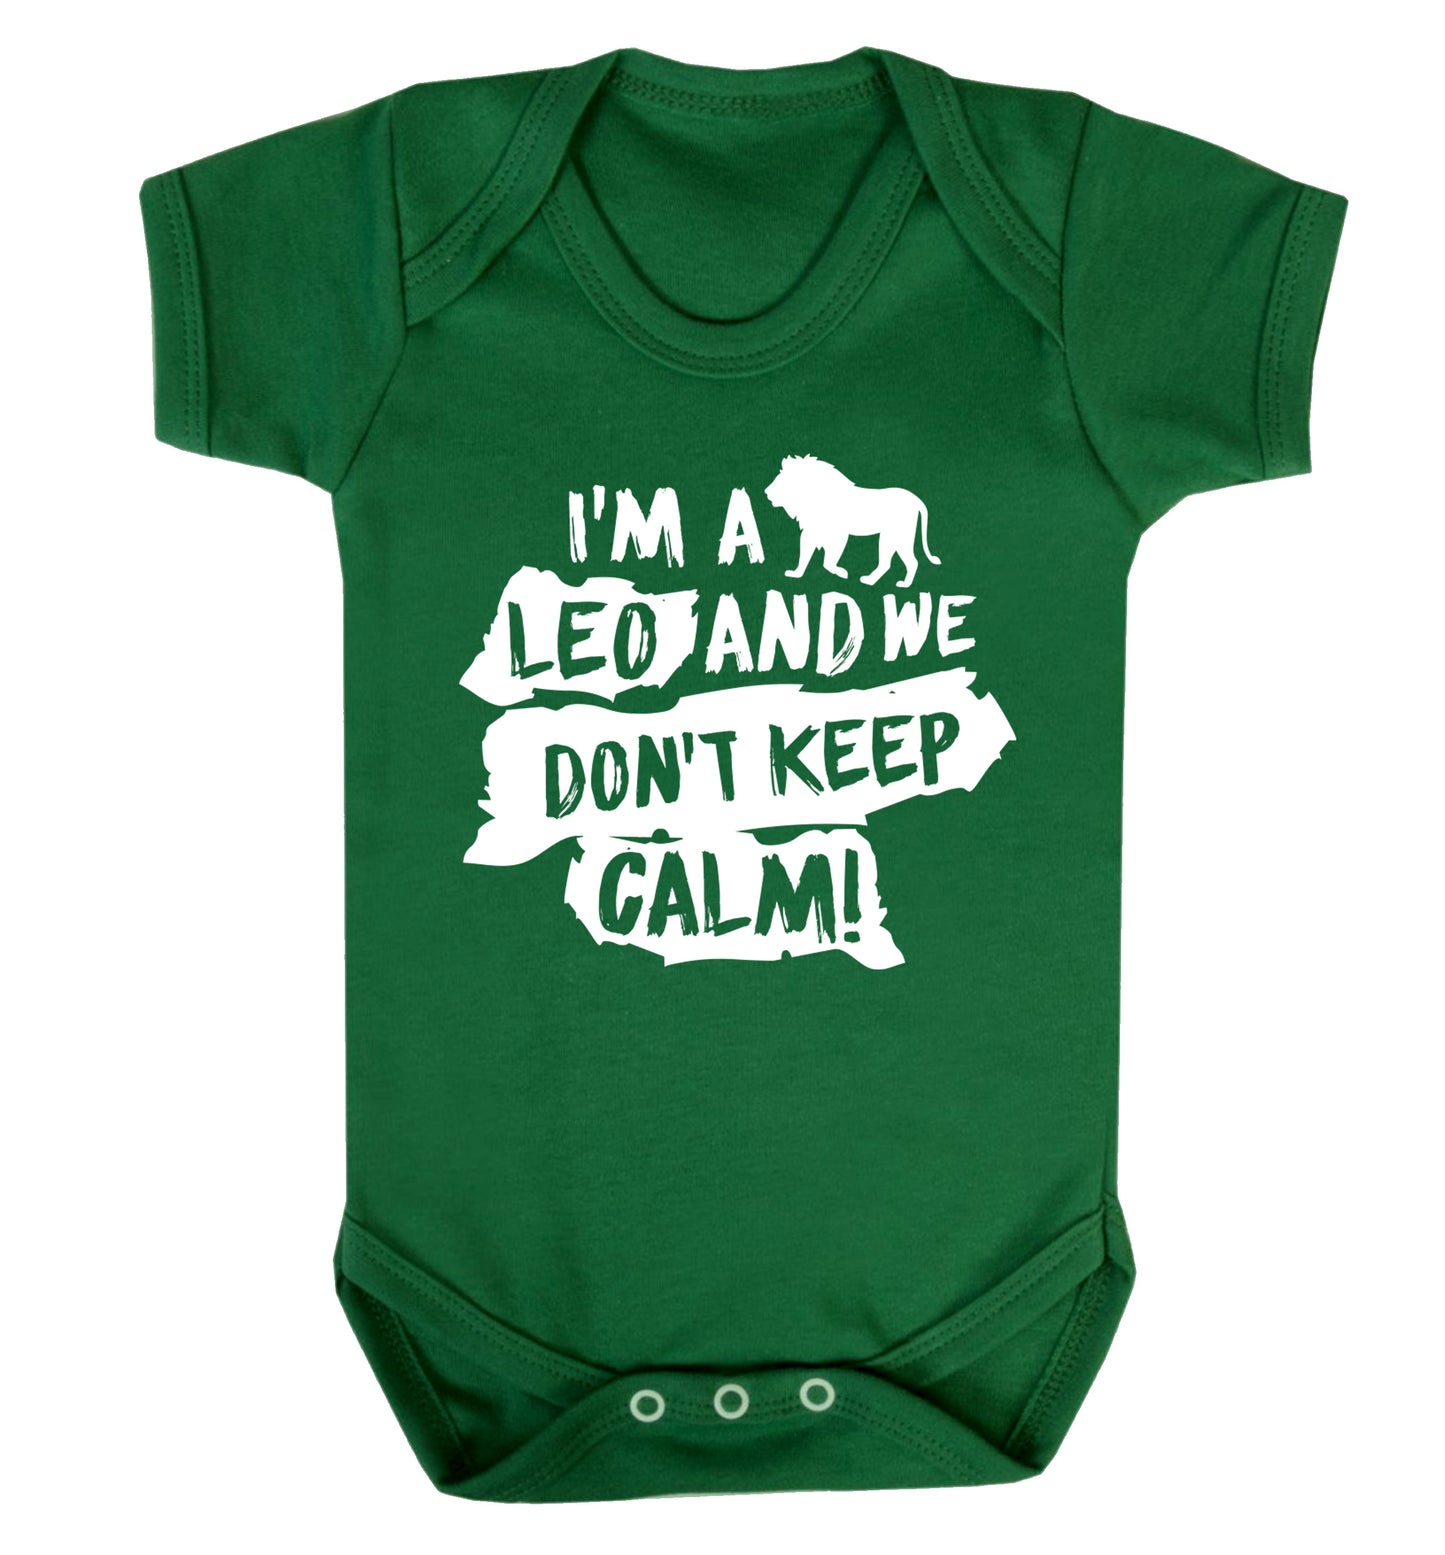 I'm a leo and we don't keep calm! Baby Vest green 18-24 months